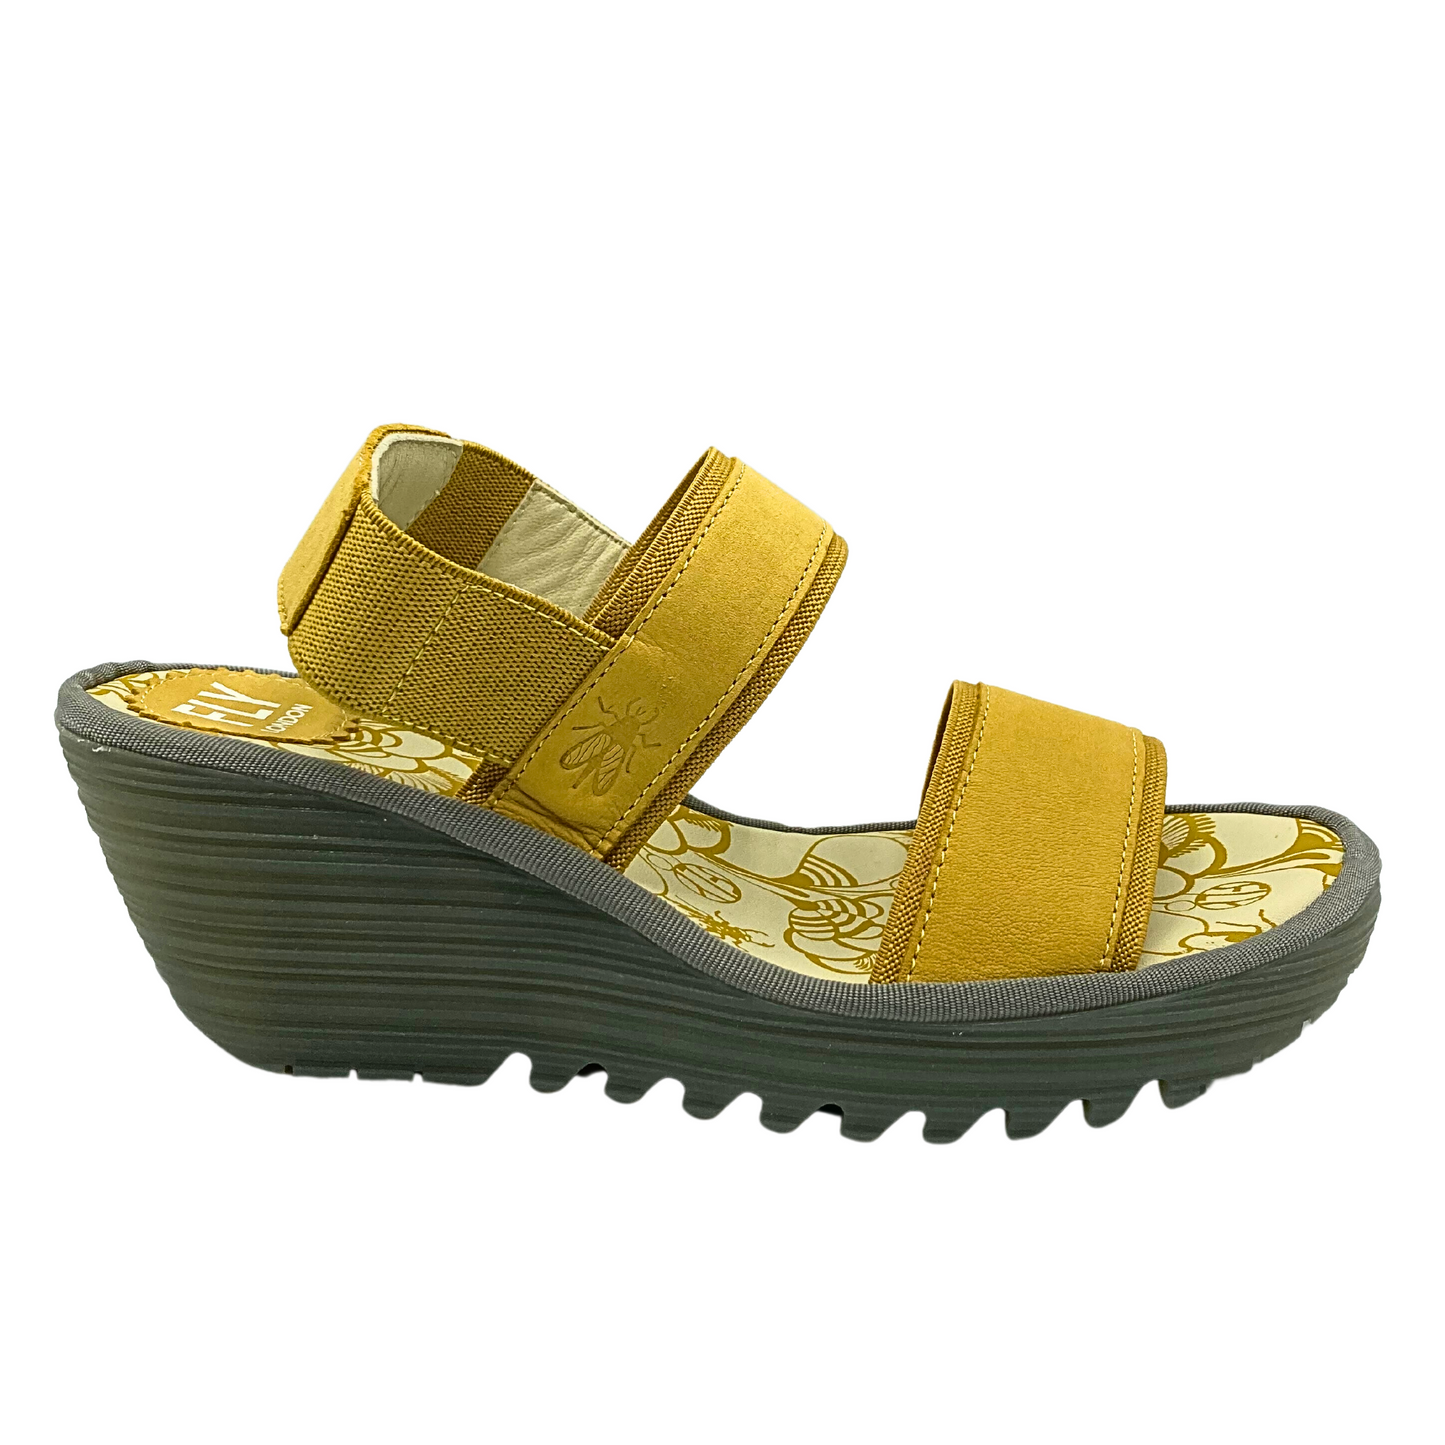 Outside view of a wedge sandal in a golden yellow color.  Slip on style with an elastic back strap and open toe